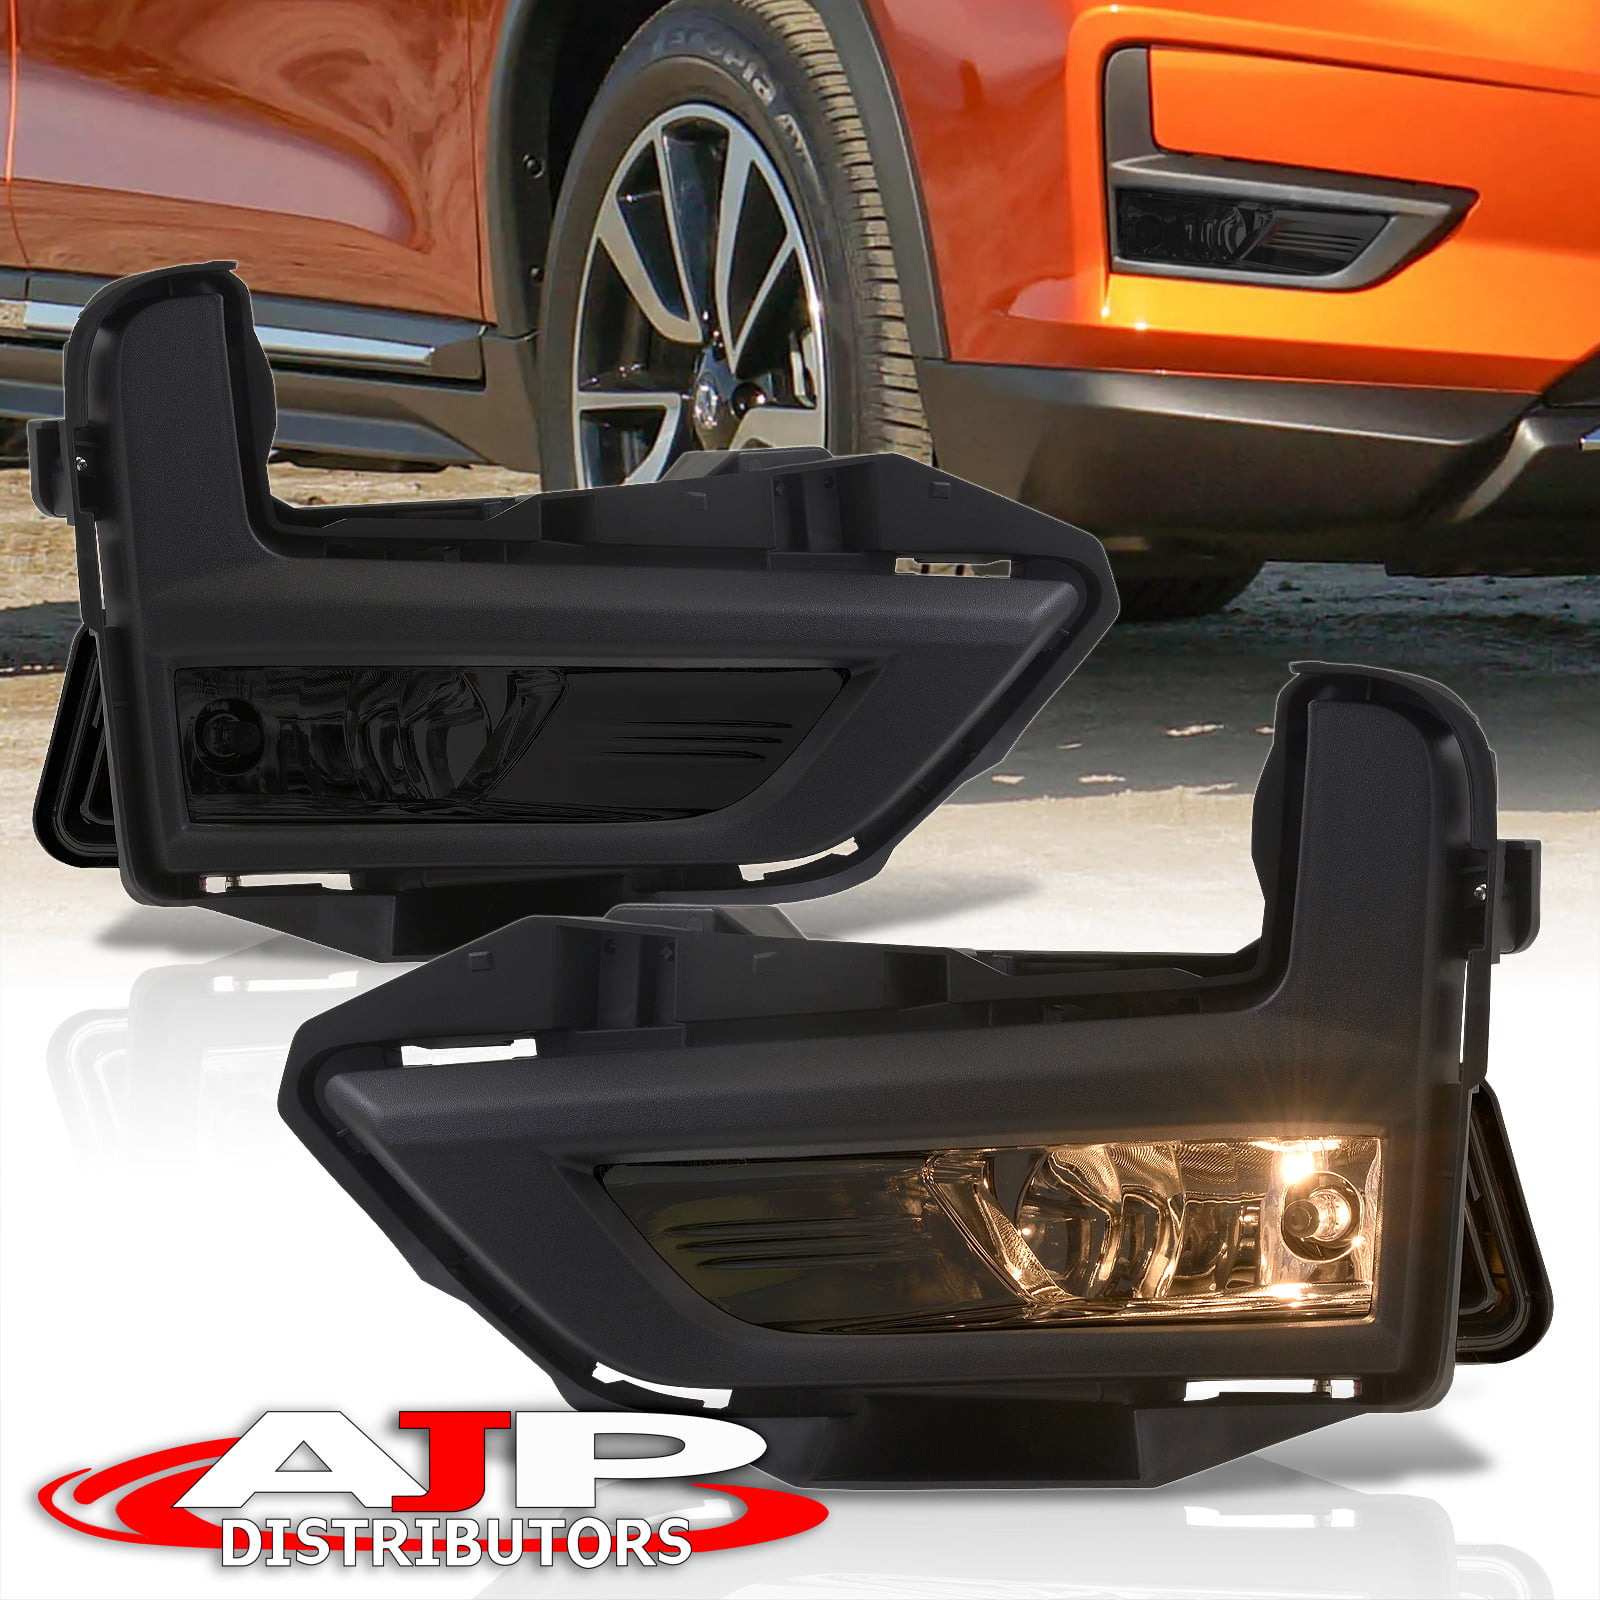 Smoked Lens Front Bumper Fog Light/Lamp+Switch+Chrome Bezel Pair Compatible with Camry 12-14 